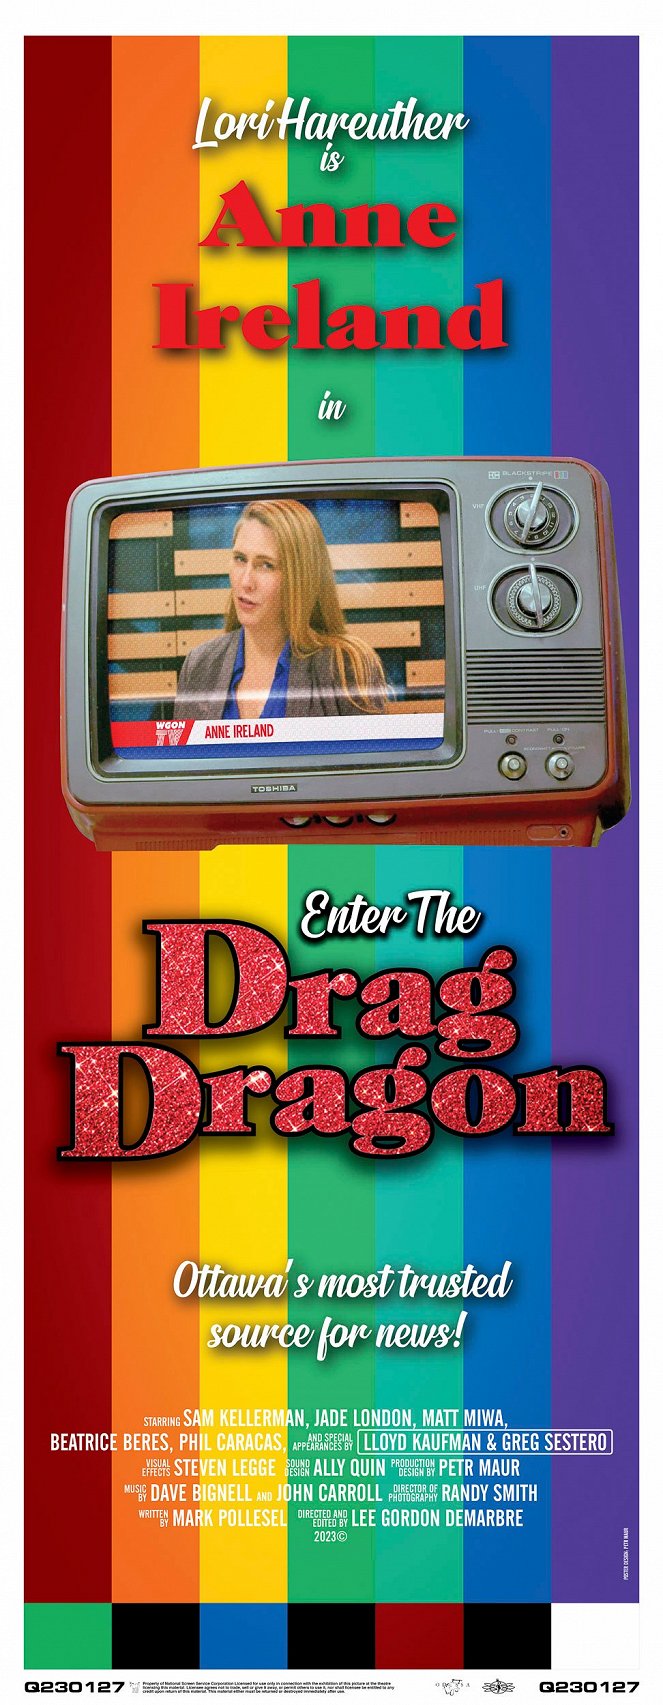 Enter the Drag Dragon - Affiches